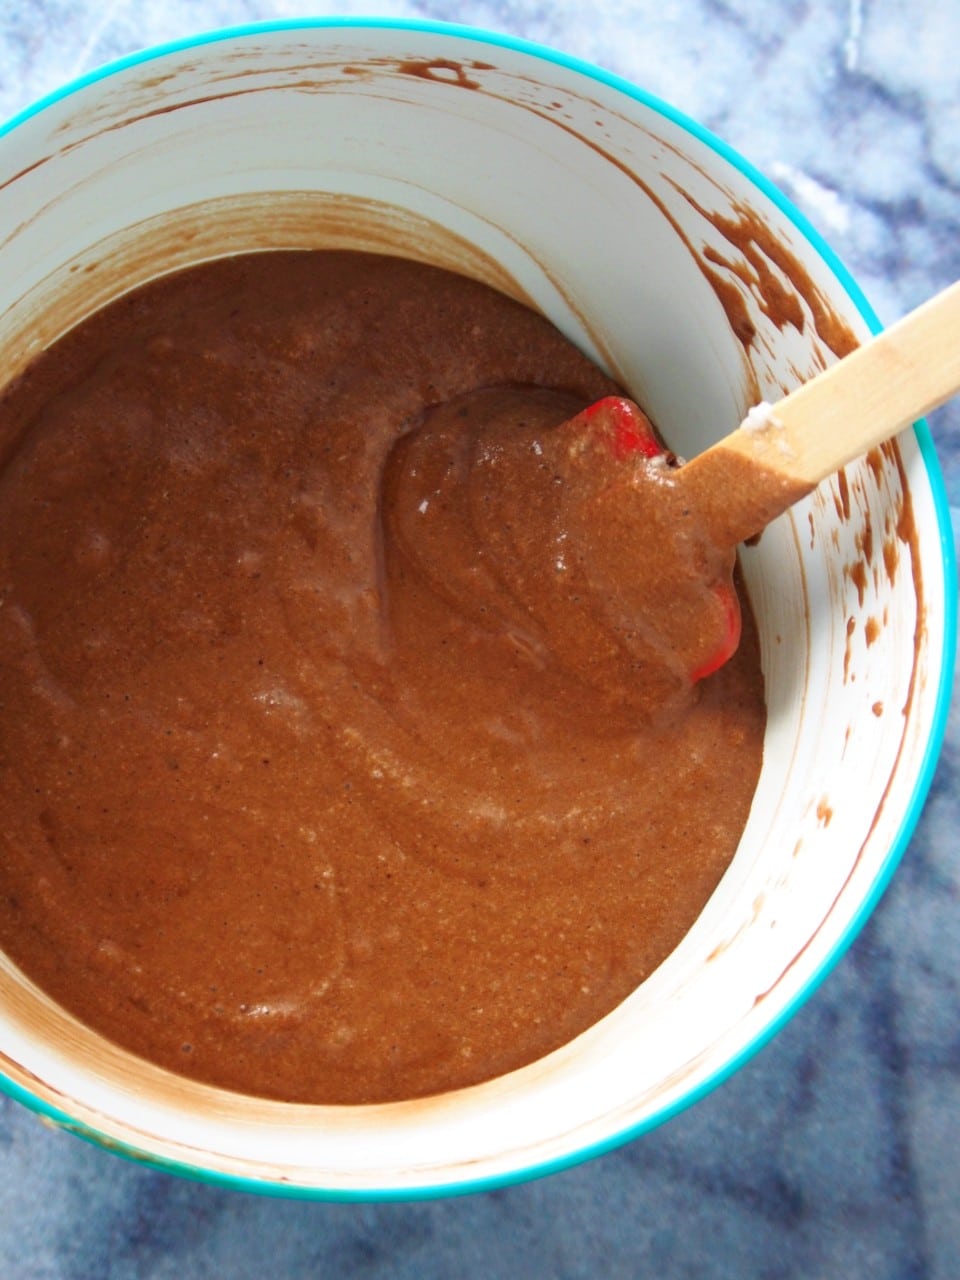 Mixing the batter of chocolate mamon on a mixing bowl.